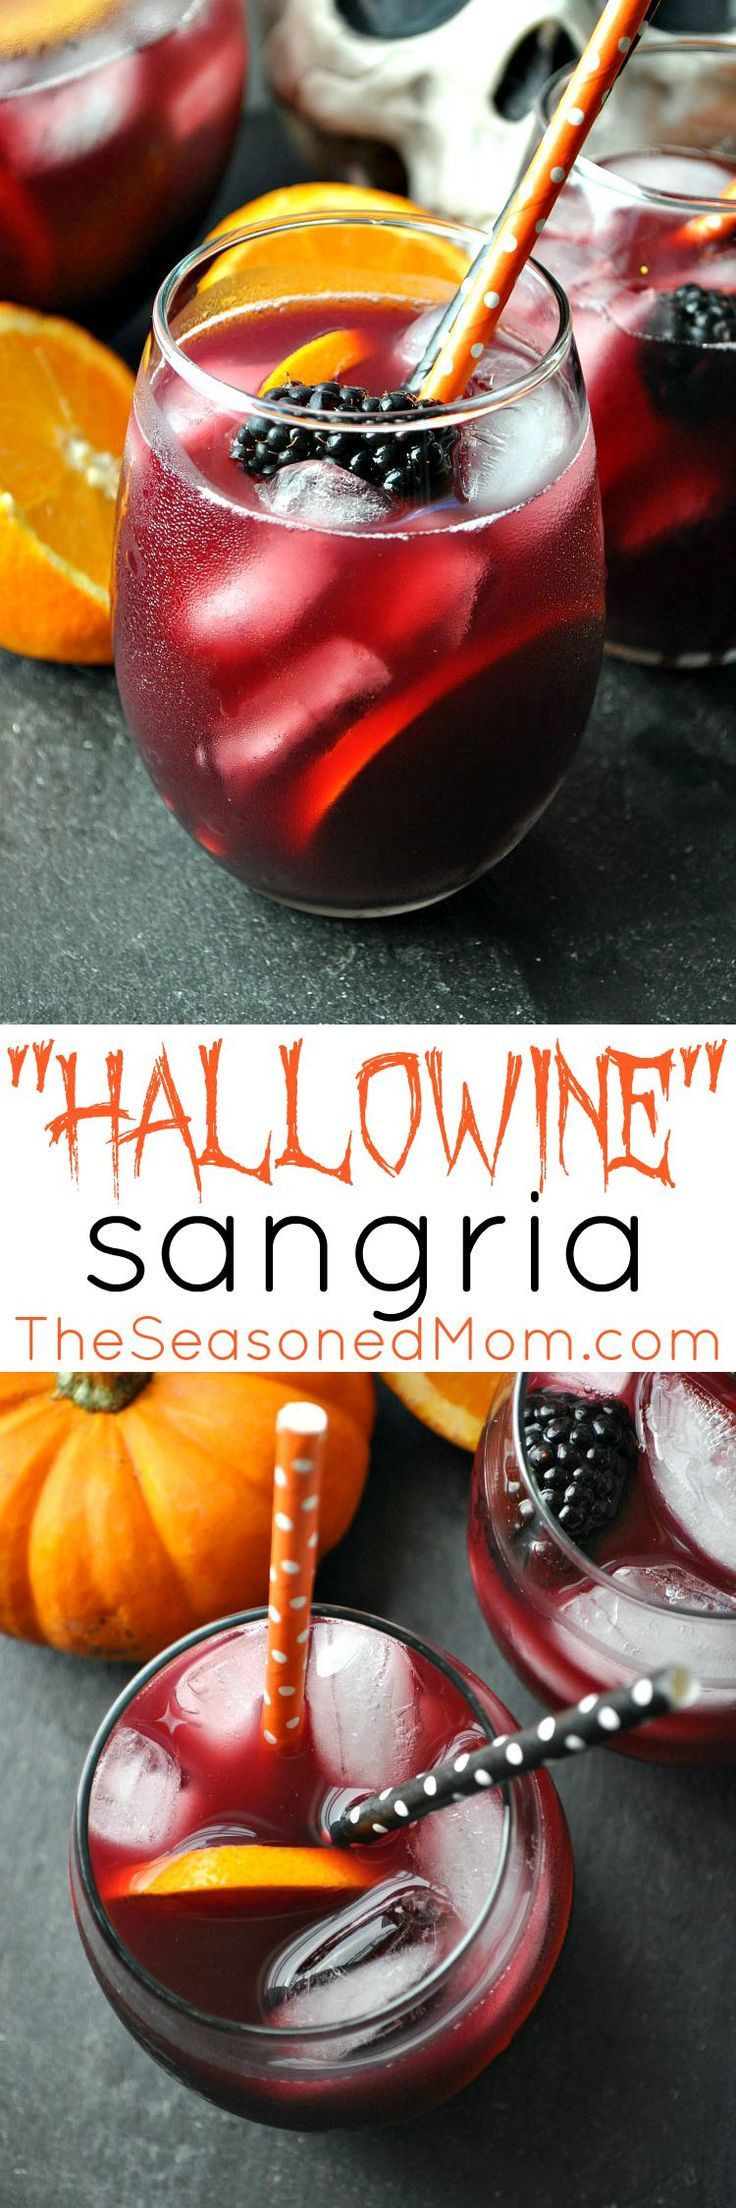 Halloween Party Drink Ideas For Adults
 Hallowine Sangria